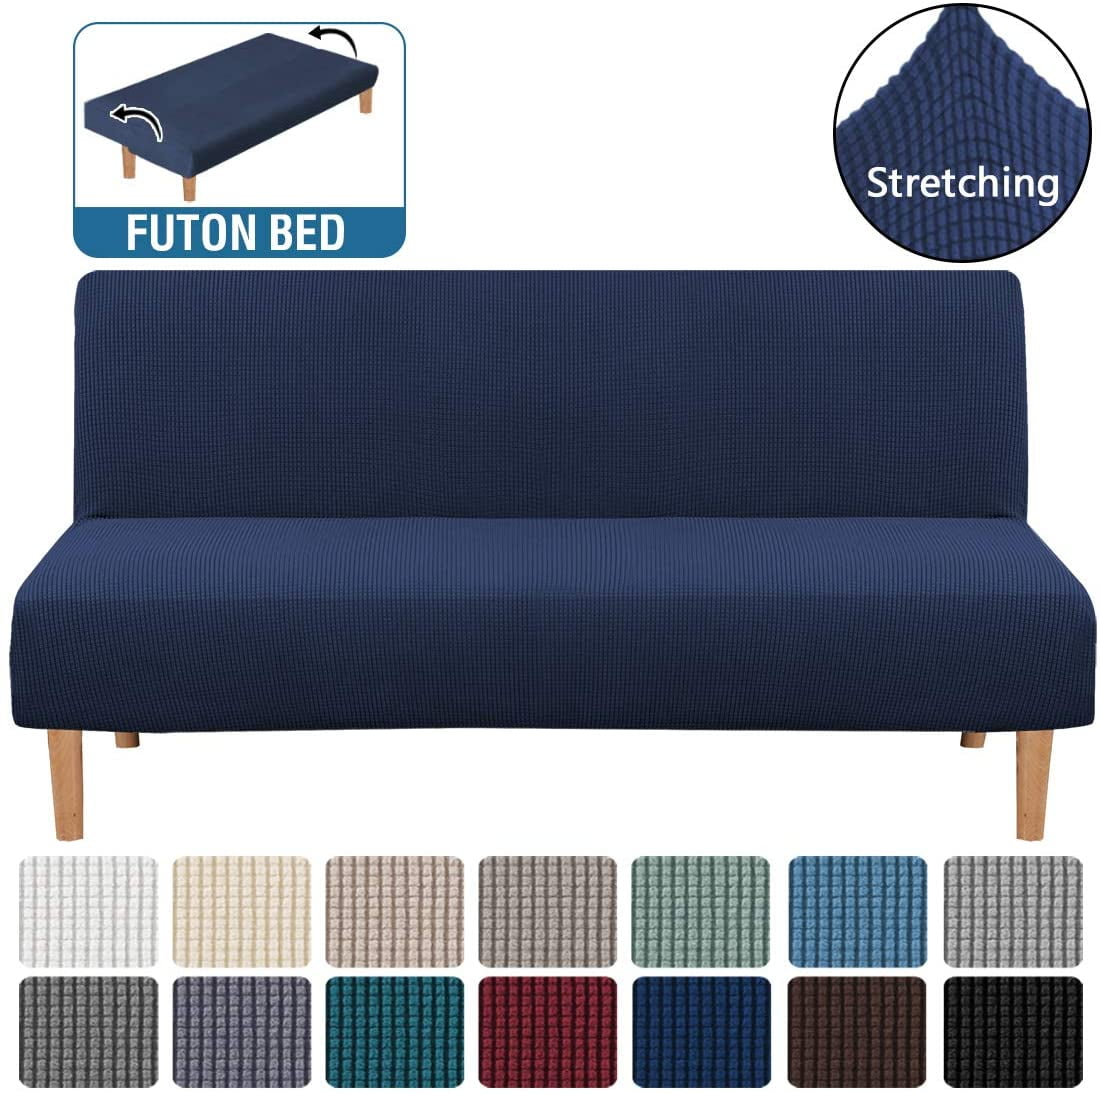 Slipcovers Protector Navy Leather Look Vinyl Twin Size Futon Mattress Covers 